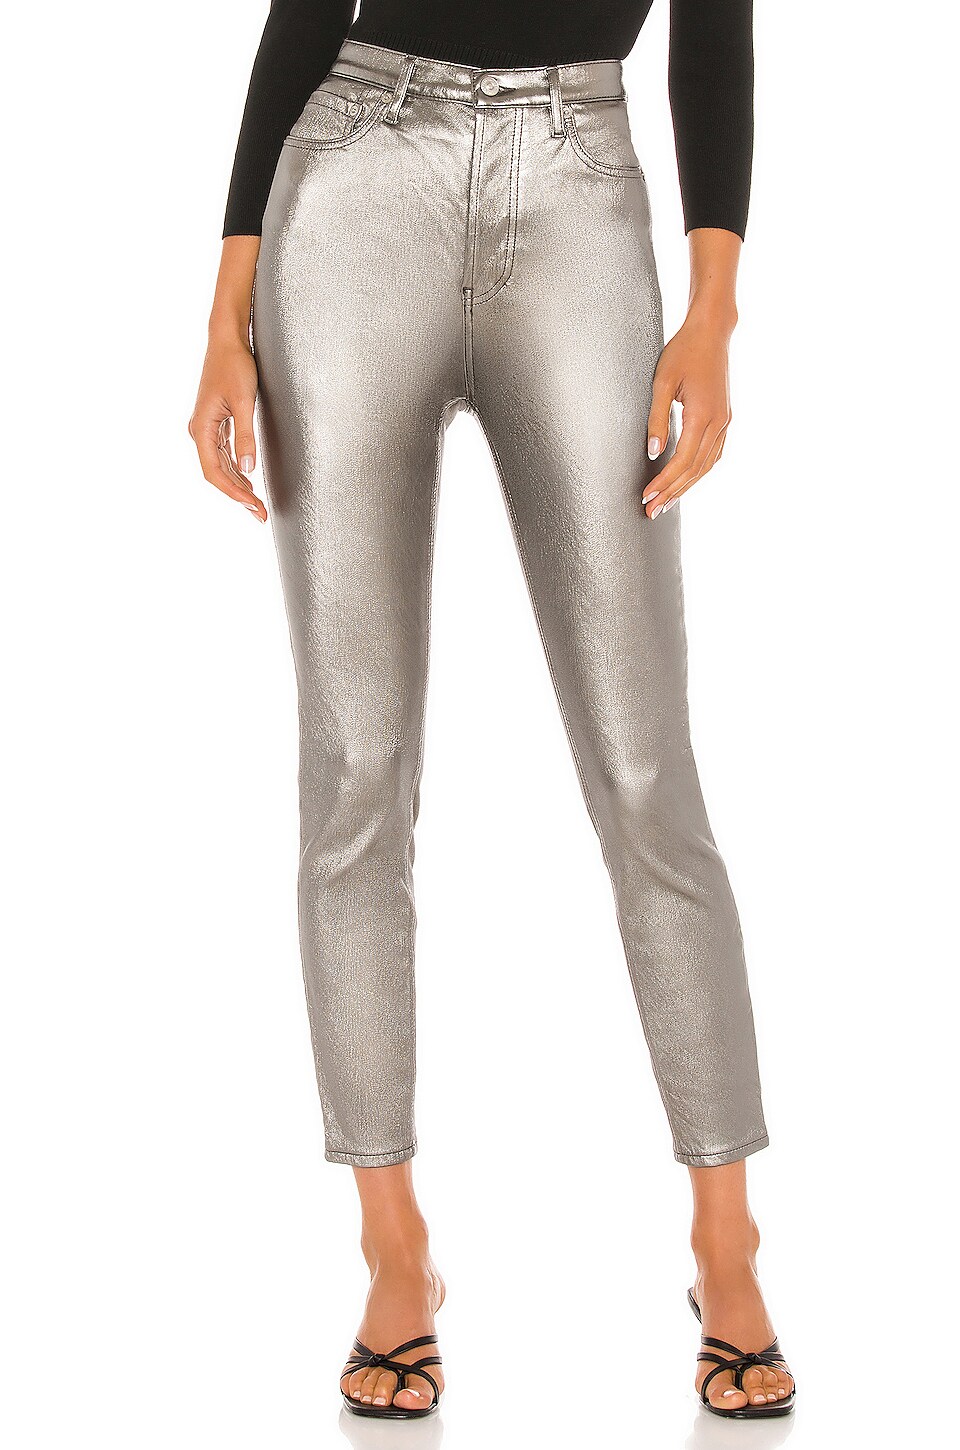 Free People We the Free  Phoenix Skinny Coated Silver Jeans Size 26 Sample